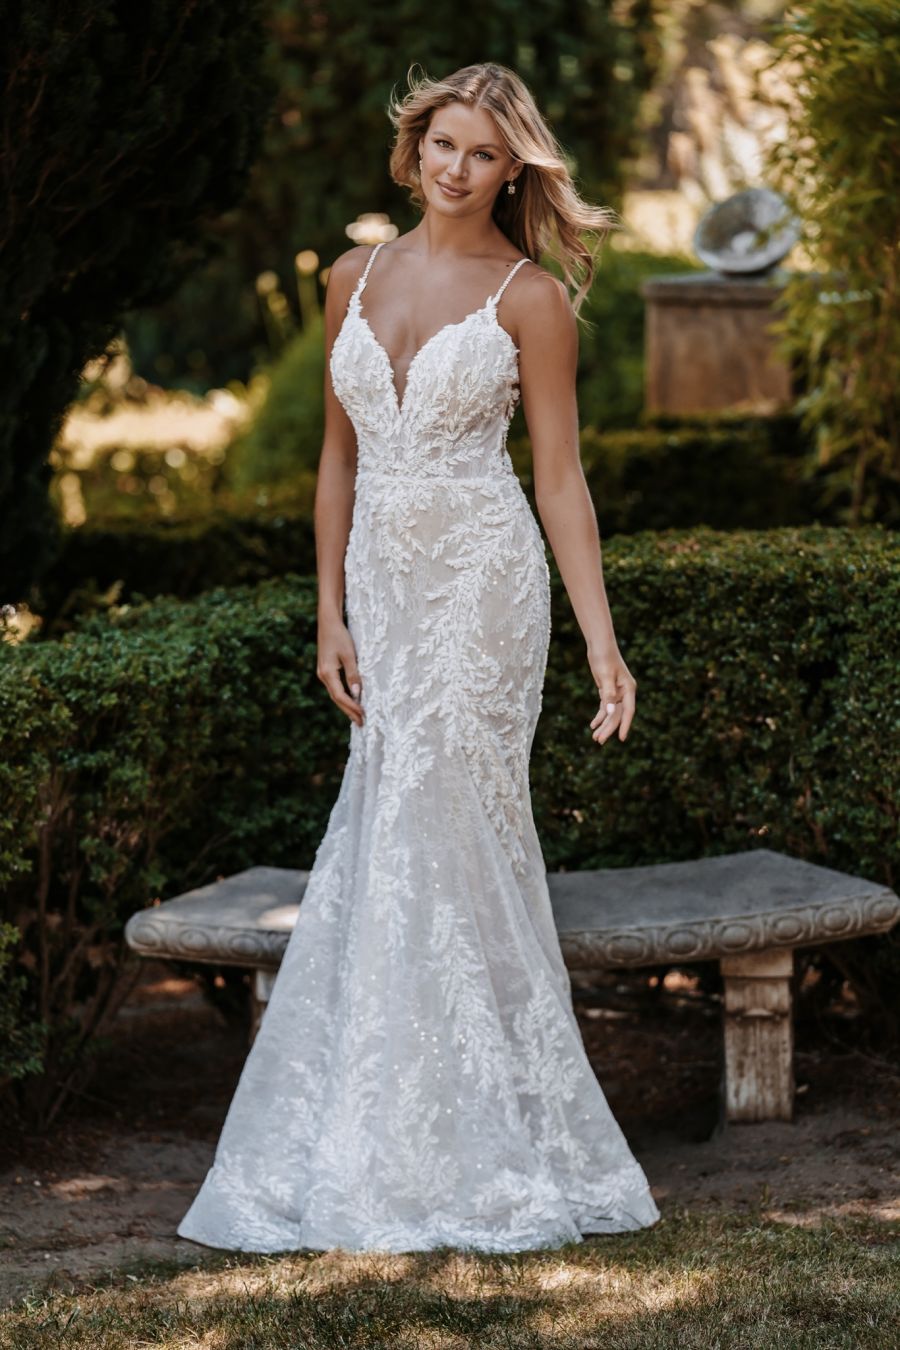 Allure Bridal Dresses & Gowns, Lace Wedding Dresses By Allure - Flares  Bridal +Formal